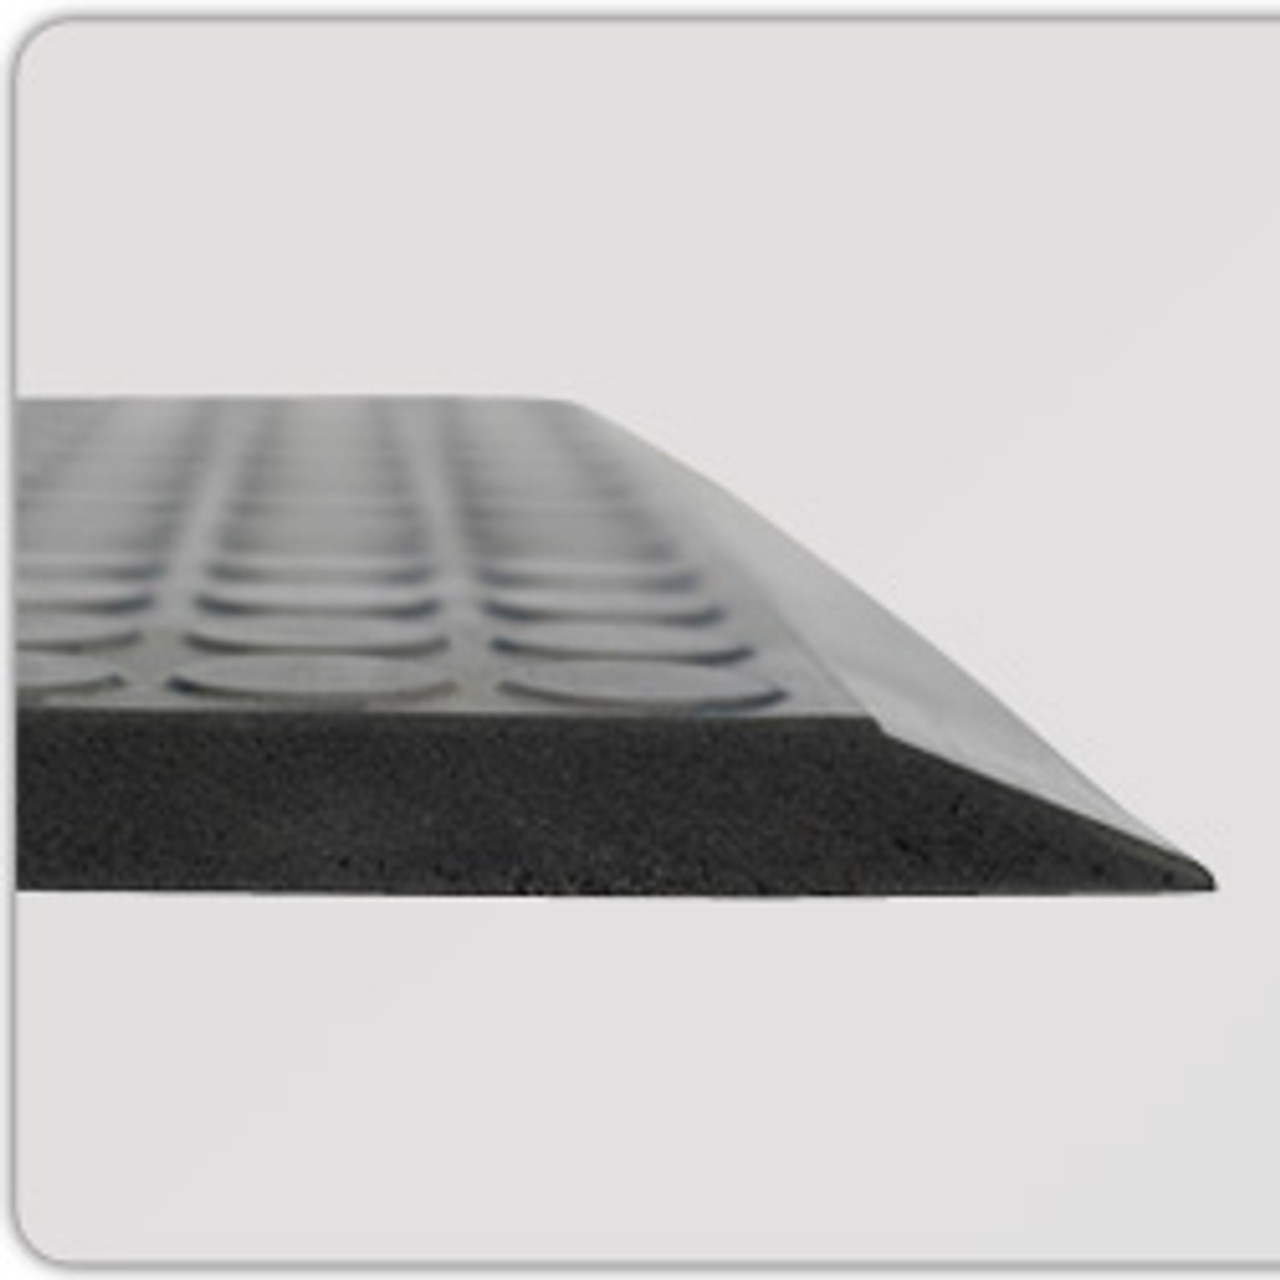 2 Width x 5 Length x 0.62 Thickness for Non-Critical Environments Anthracite Ergomat Polyurethane Anti-Fatigue Mat 